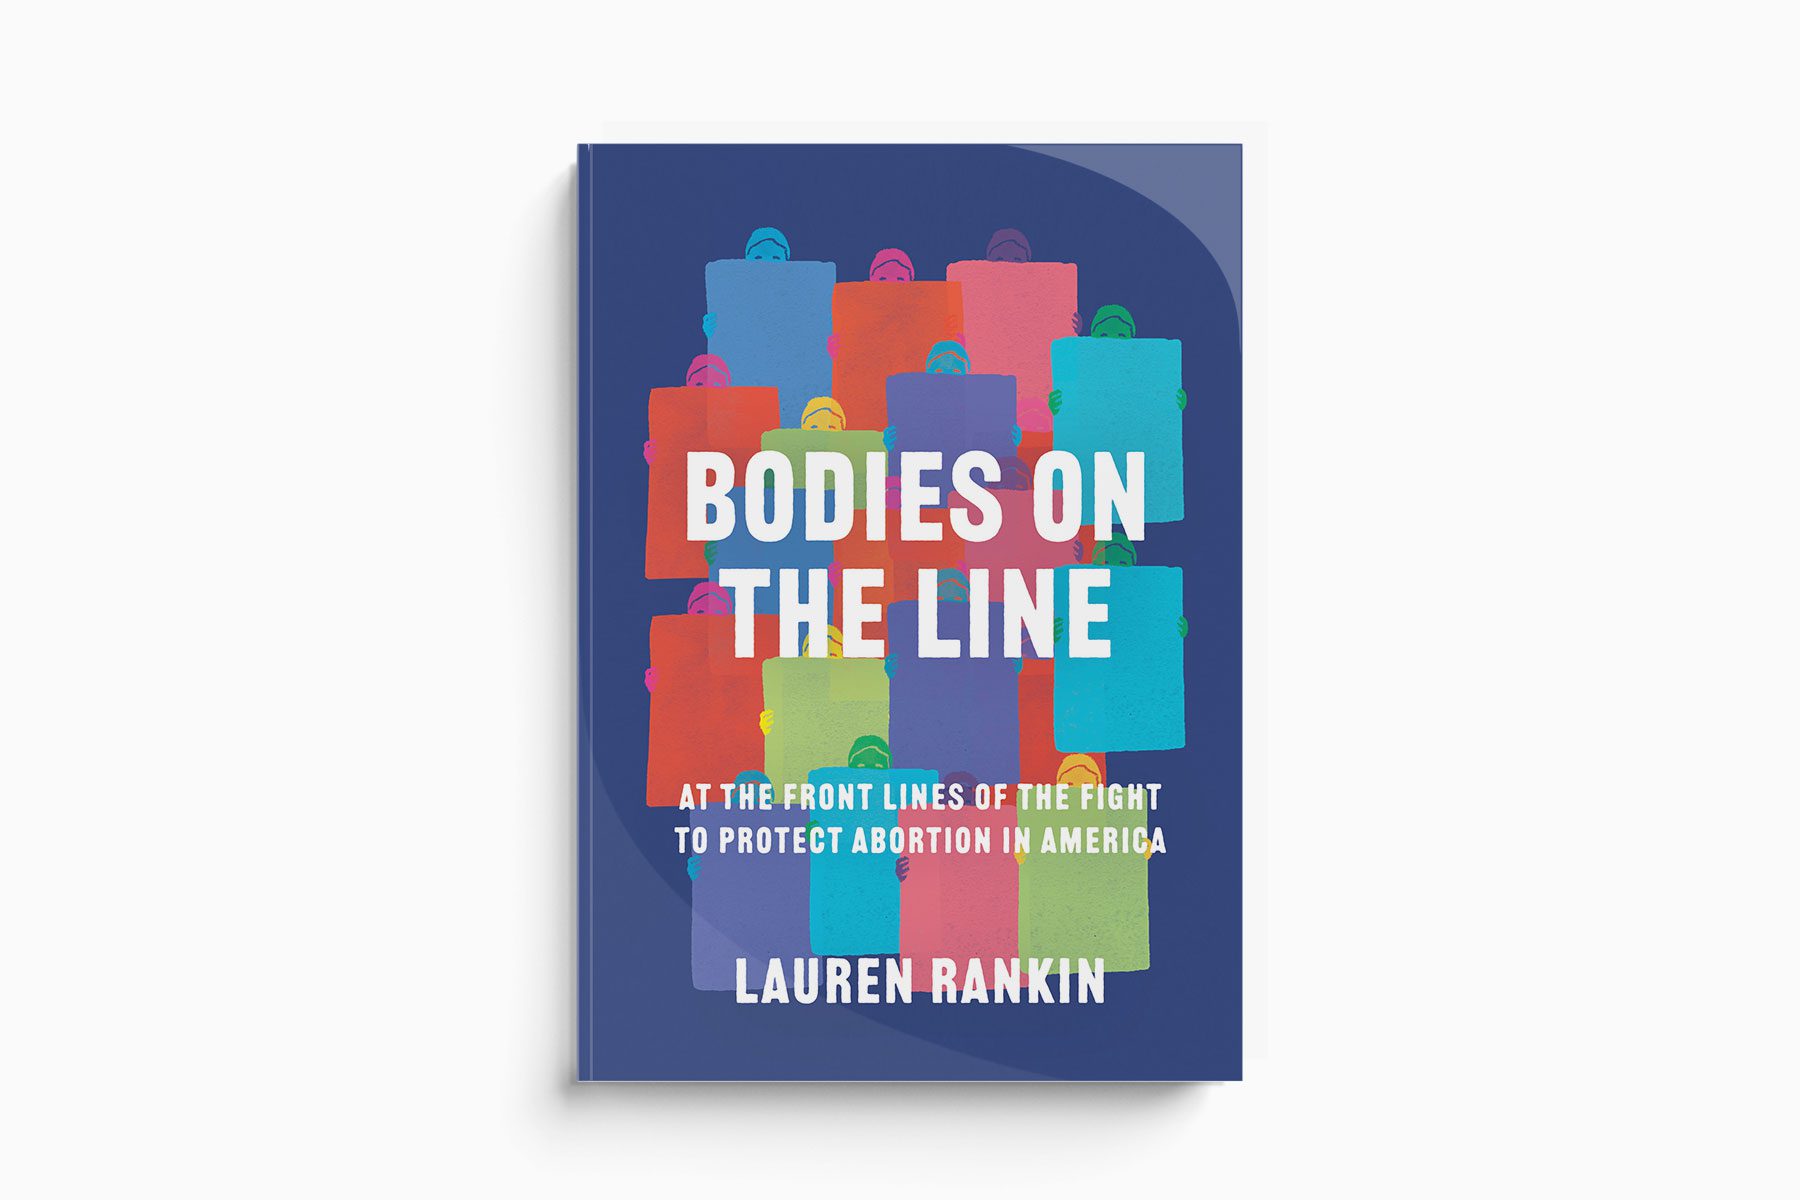 A purple book with the words “Bodies on the Line: At the Front Lines of the Fight to Protect Abortion in America" on the cover.